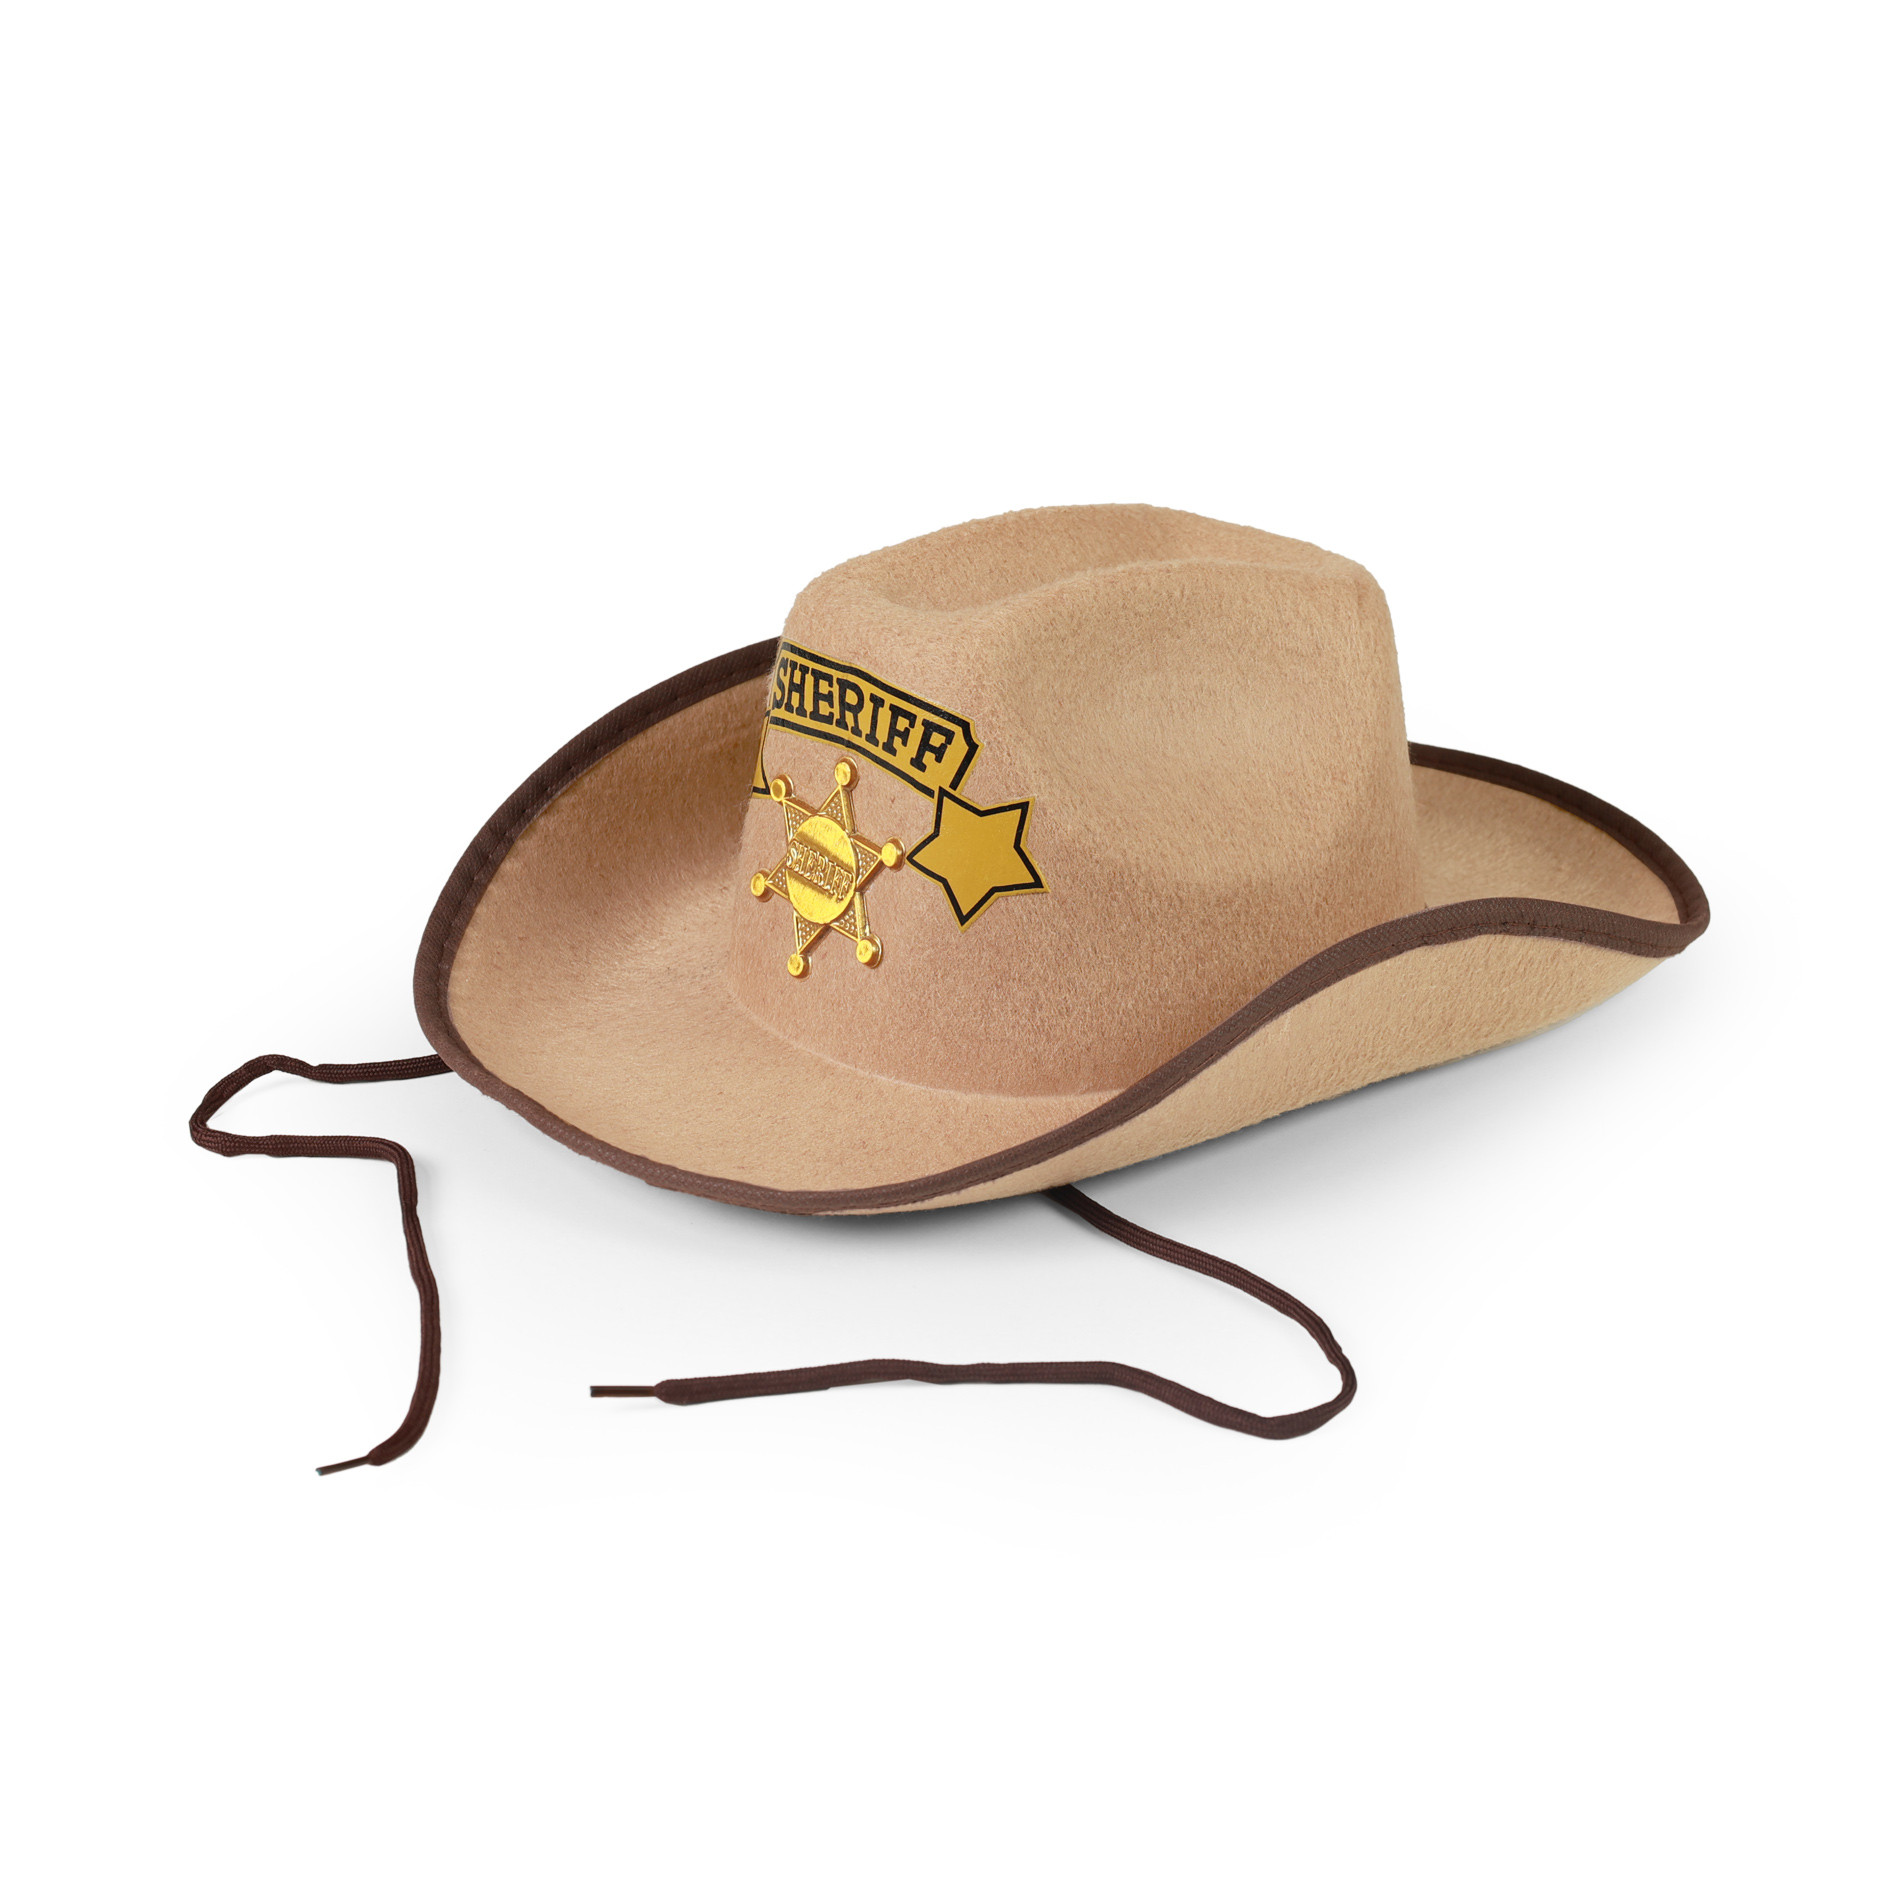 the sheriff hat for kids